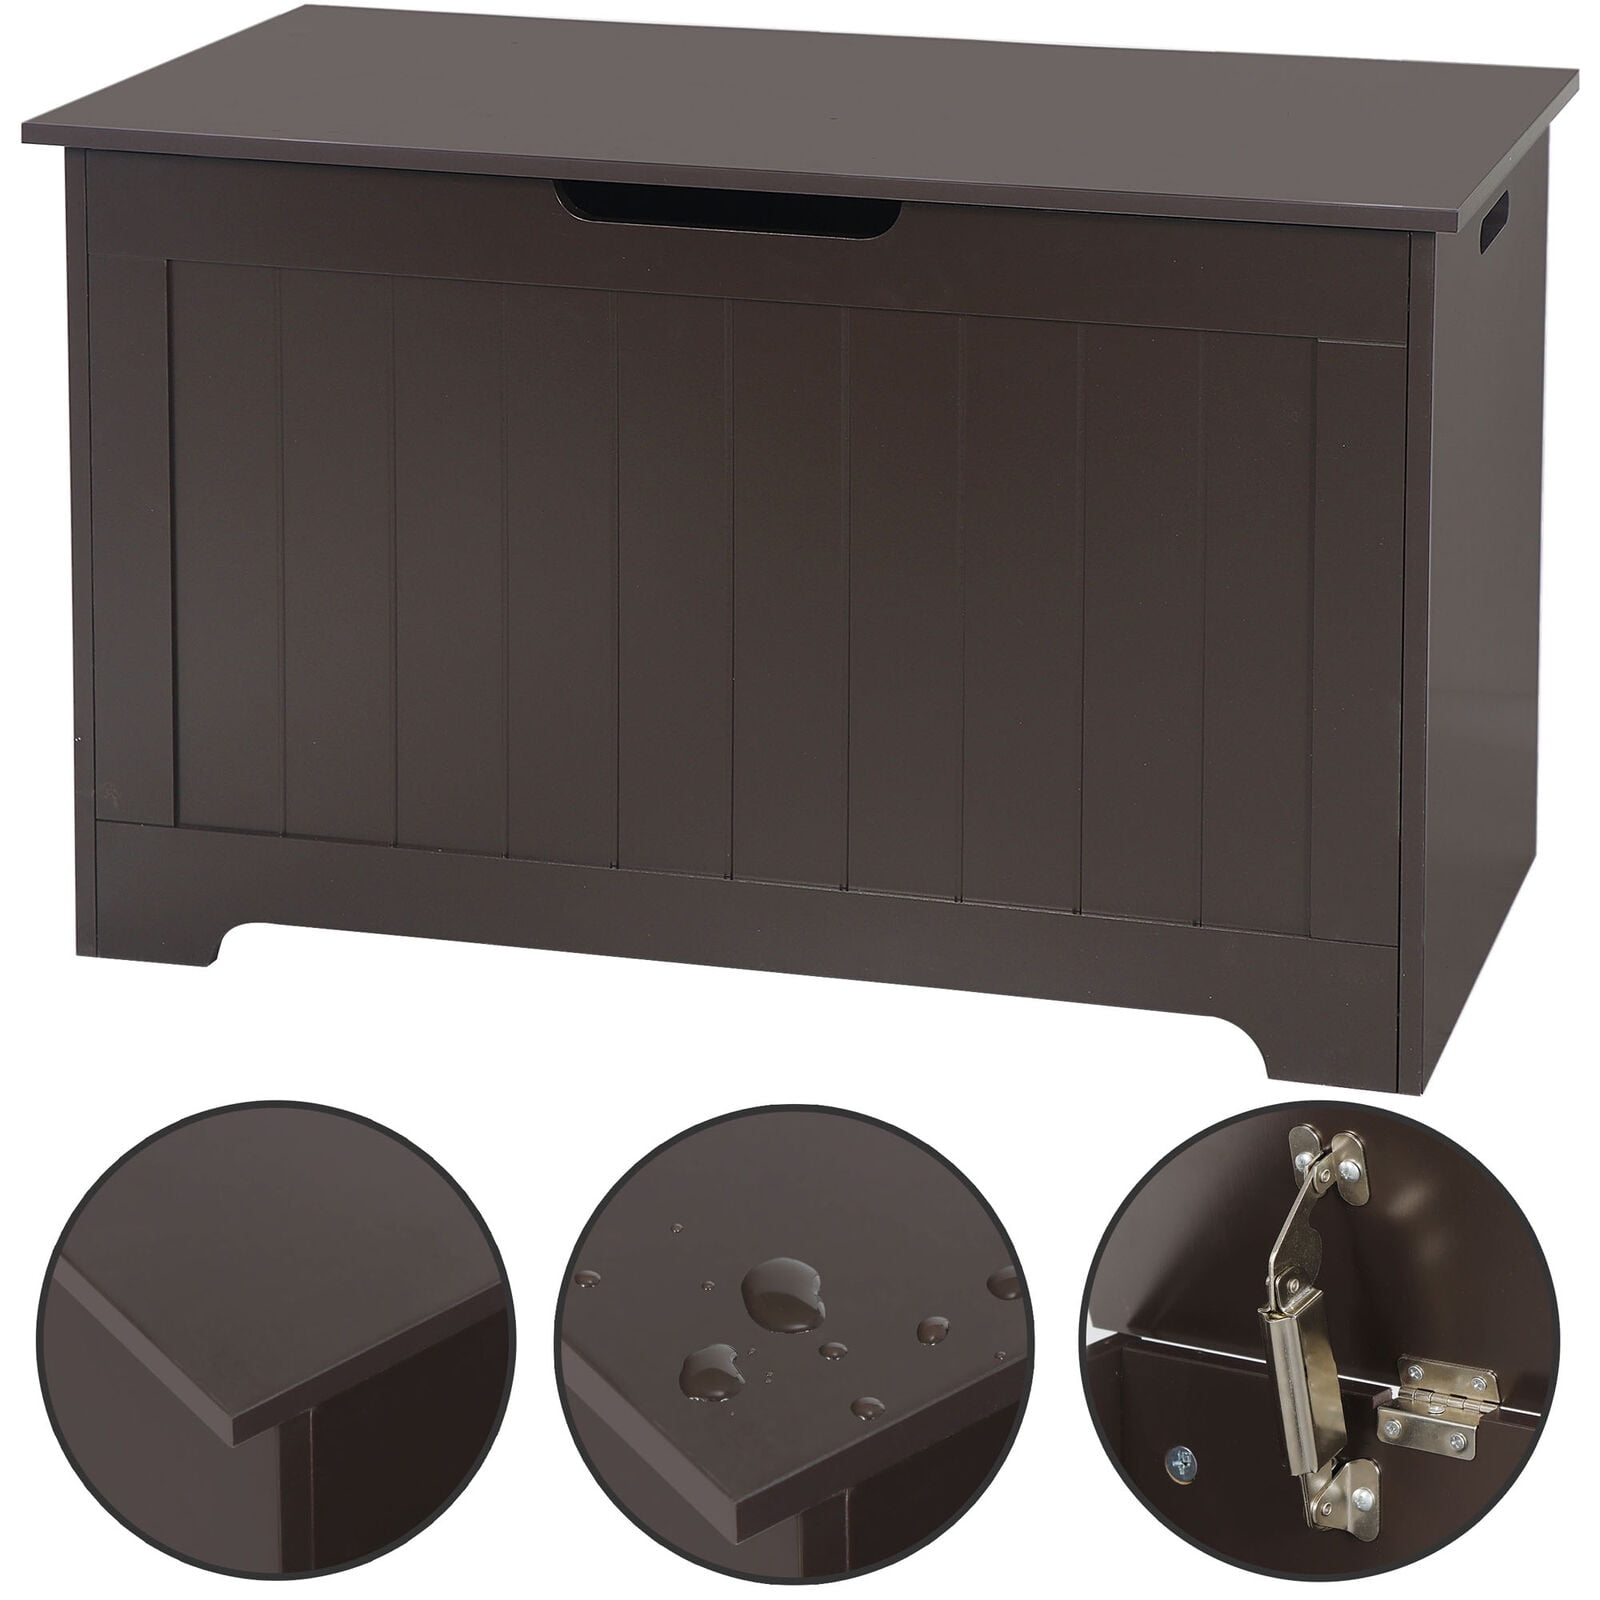 ZENSTYLE Lift Top Entryway Storage Toy Chest/Bench with 2